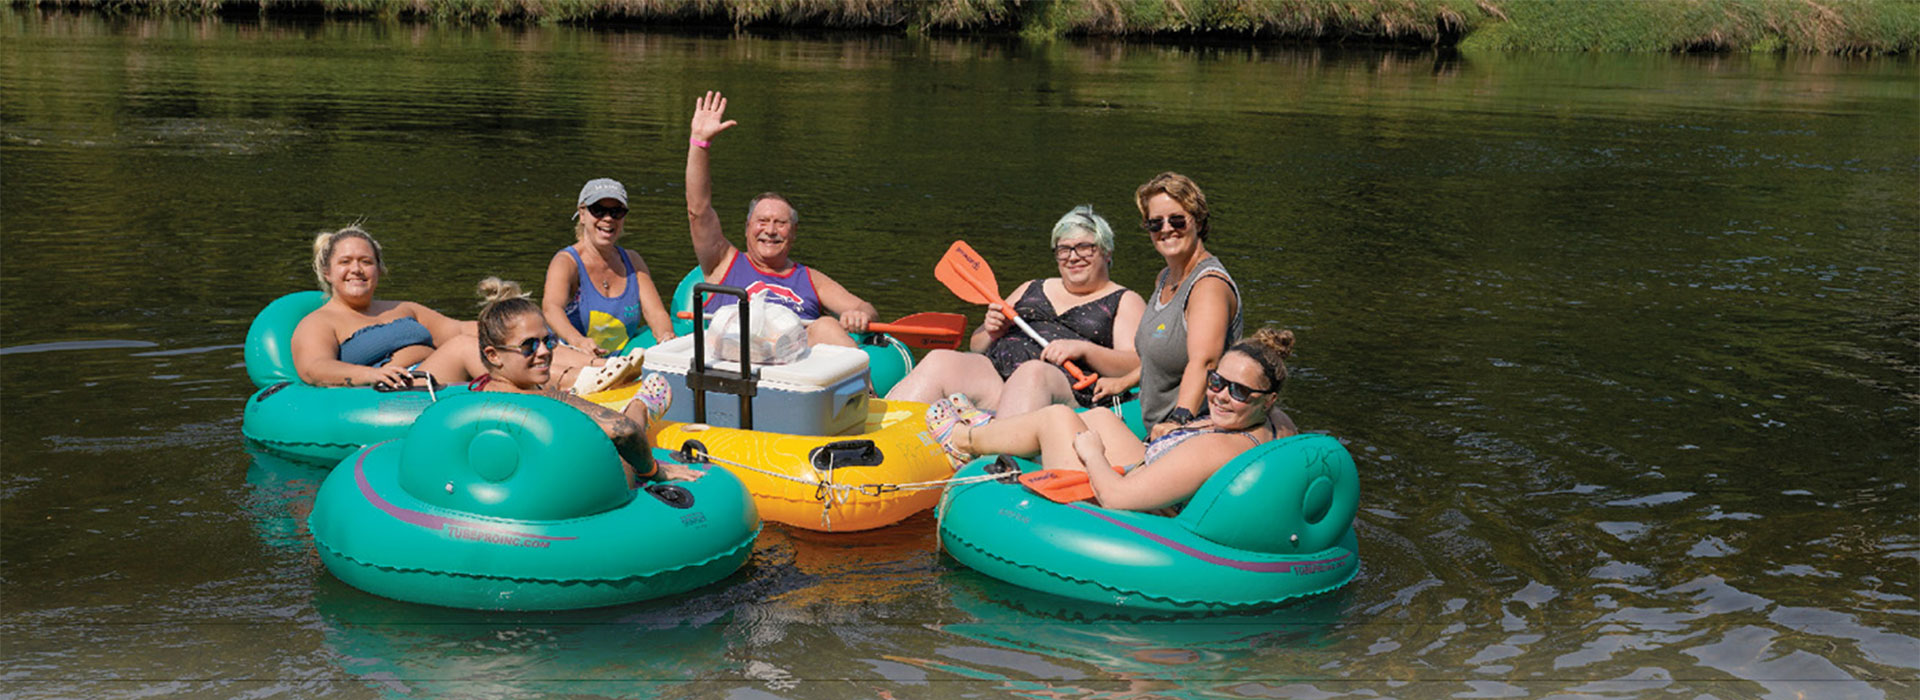 Tubers enjoying the DuPage River where property owners want to restrict public access